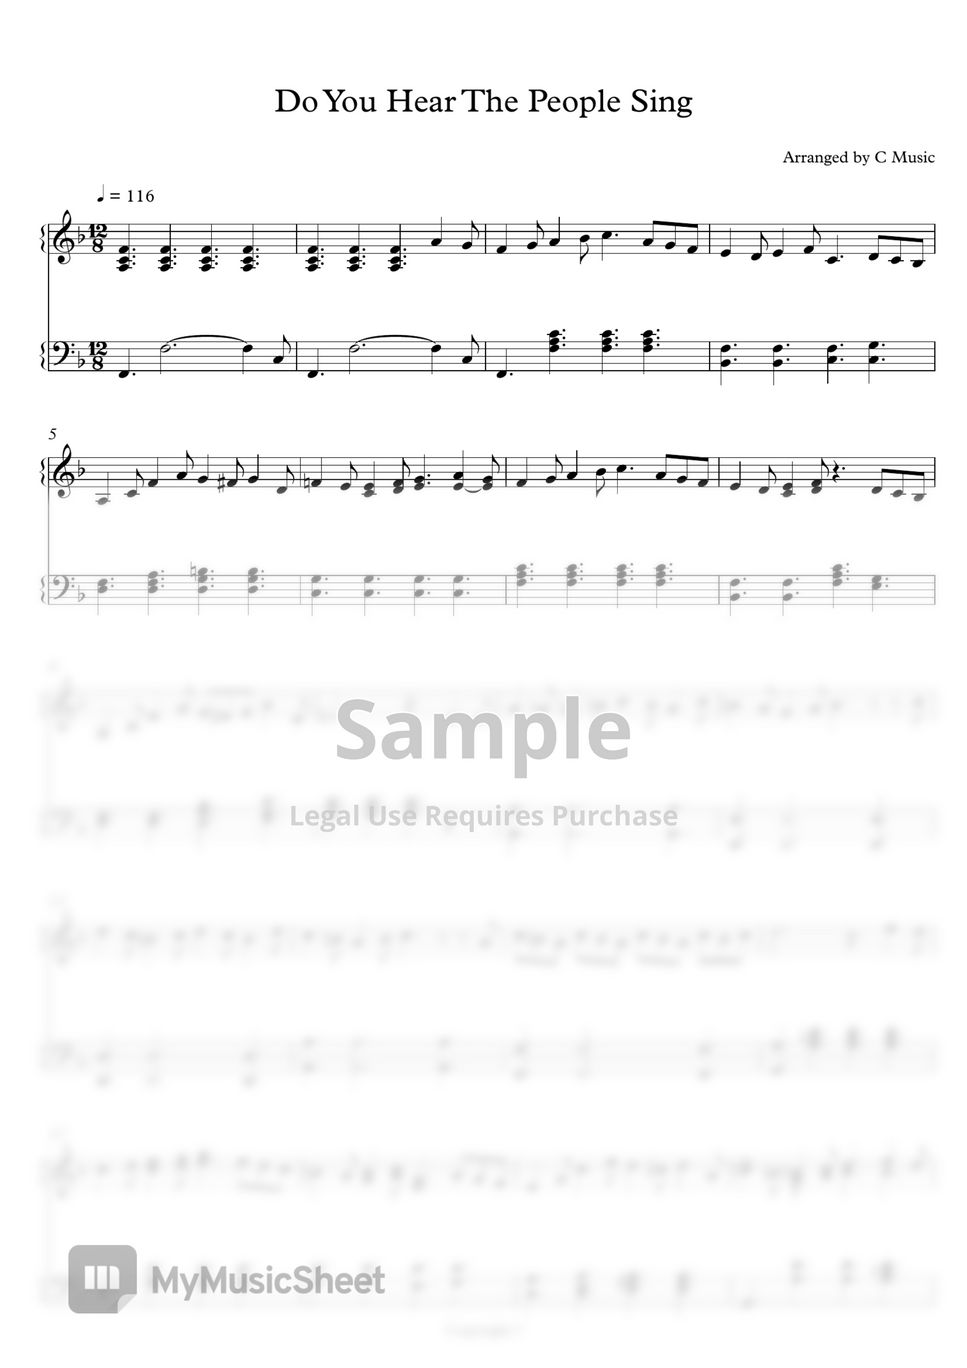 Les Misérables - Do You Hear the People Sing? (Easy Sheet) by C Music